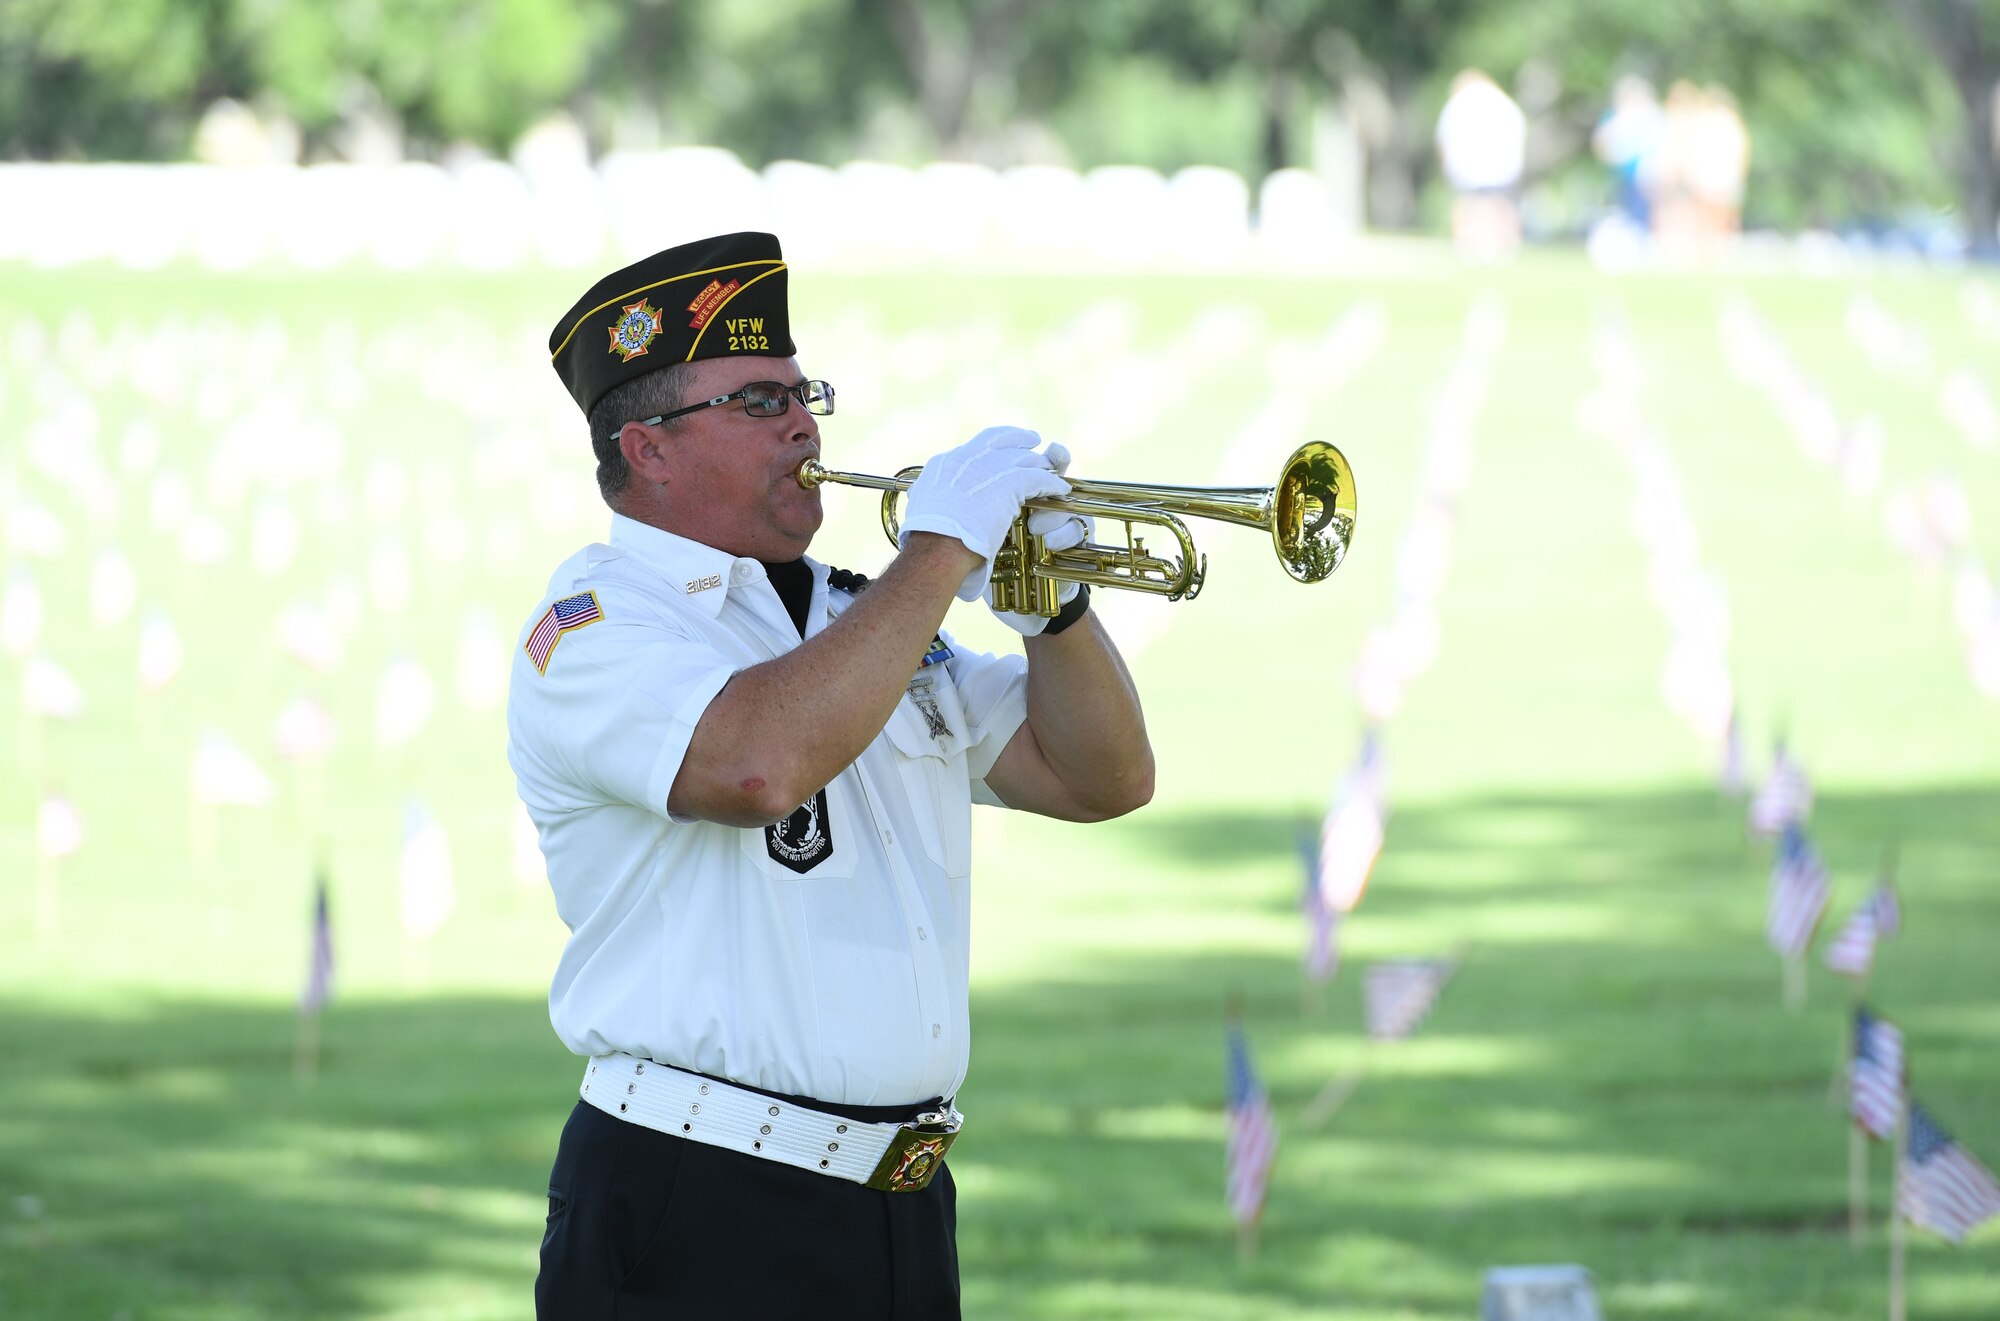 Stephan Trochessett, Post 2132 Honor Guard member, plays Taps during the Biloxi National Cemetery Memorial Day Ceremony in Biloxi, Mississippi, May 30, 2022. The ceremony honored those who have made the ultimate sacrifice while serving in the armed forces. Biloxi National Cemetery is the final resting place of more than 23,000 veterans and their family members. Every year, 800 burials take place there for men and women who served in wars years ago and for those defending America today. (U.S. Air Force photo by Kemberly Groue)